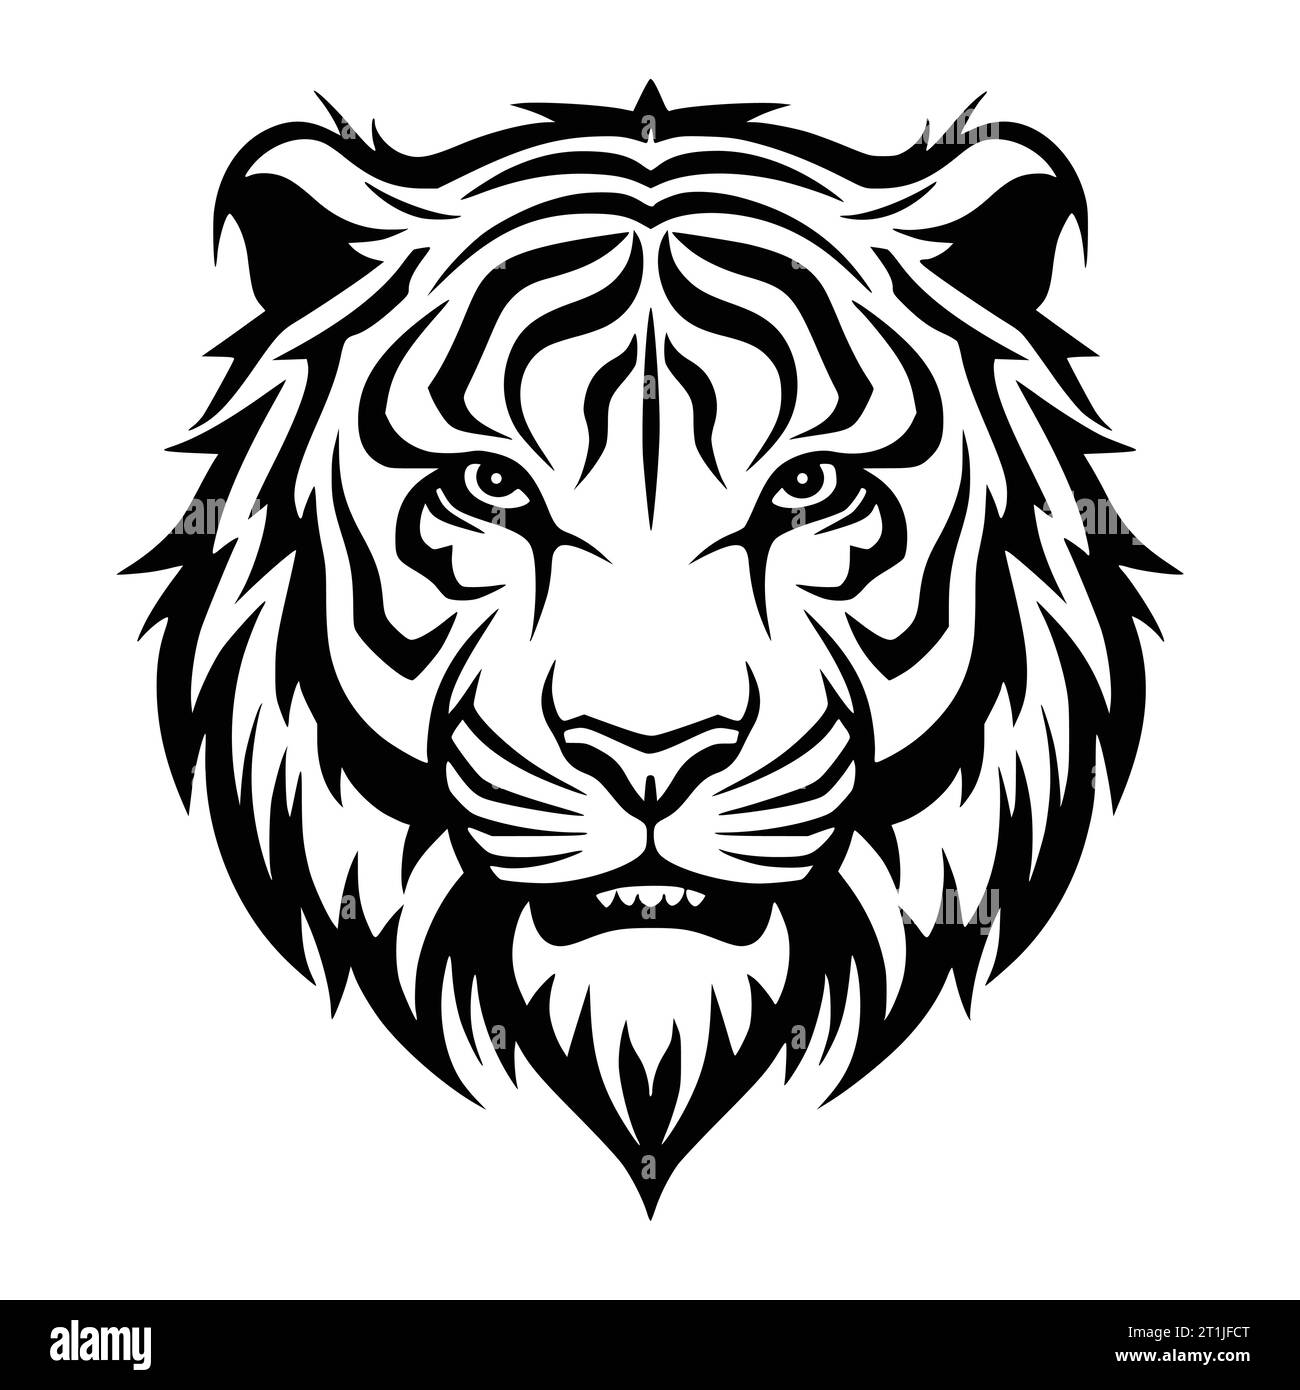 tiger angry wild animal head illustration for logo or symbol Stock Vector